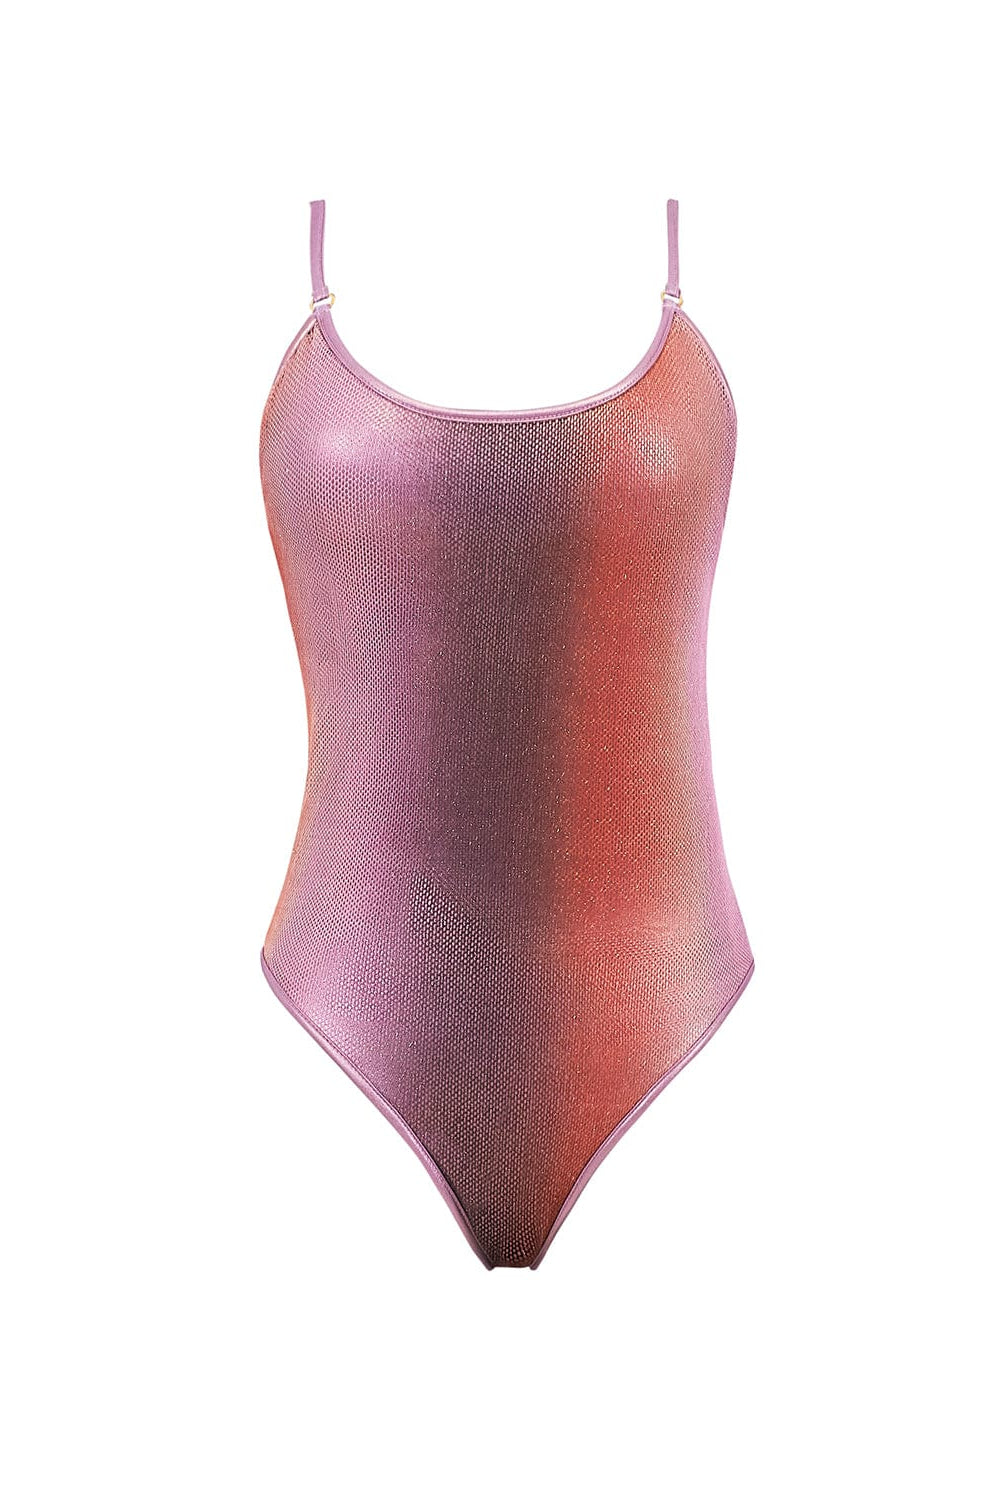 A purple one piece against a white wall.